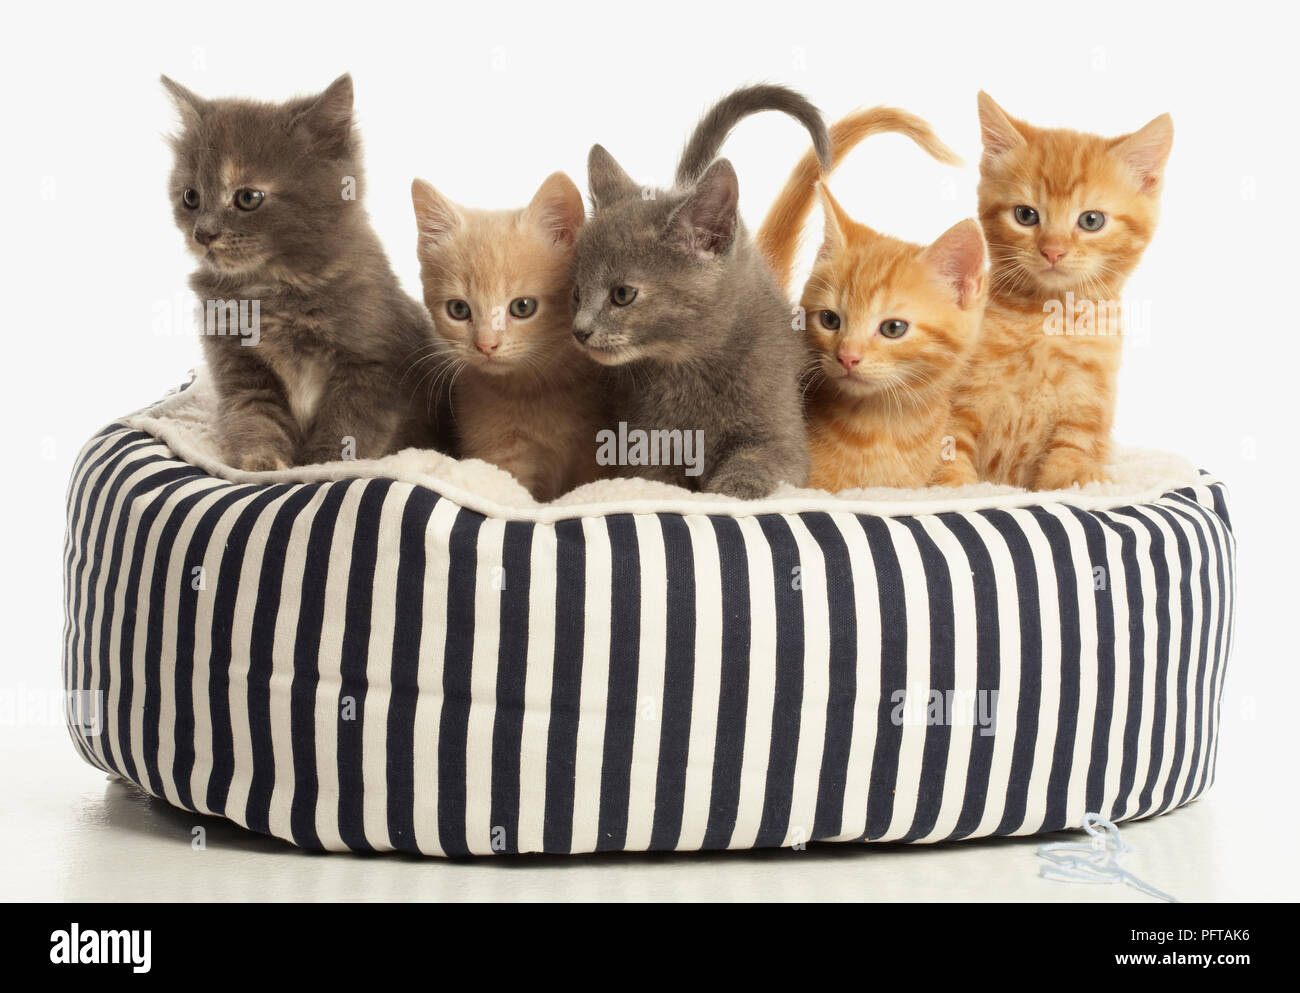 Kittens in cat bed Stock Photo